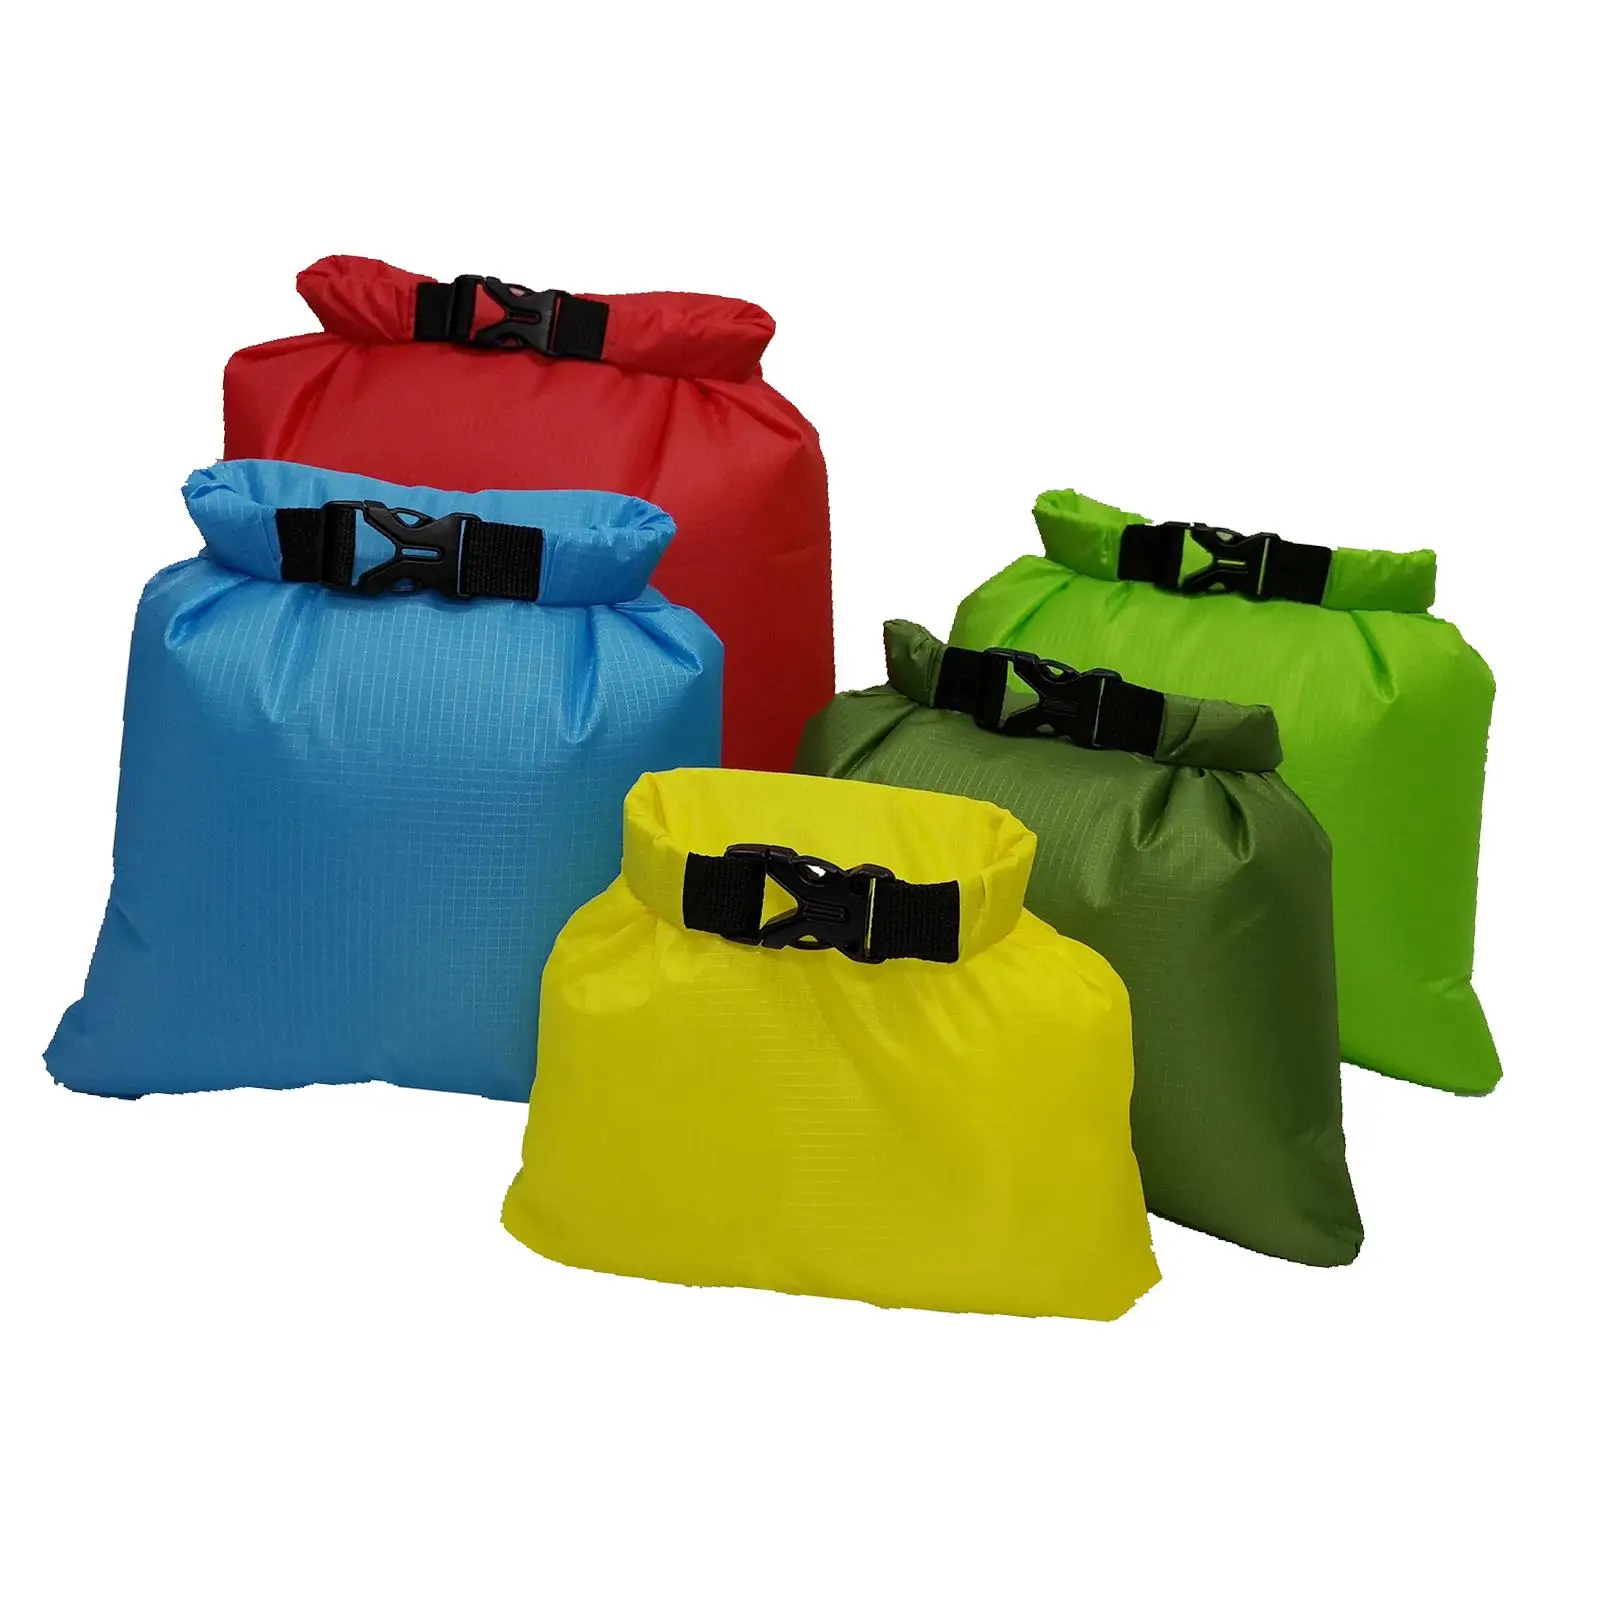 5 Pieces Drying Sack Marine Dry Bags Multipurpose Lightweight Mixed Colors for Kayaking, Fishing, Rafting, Swimming, Drifting